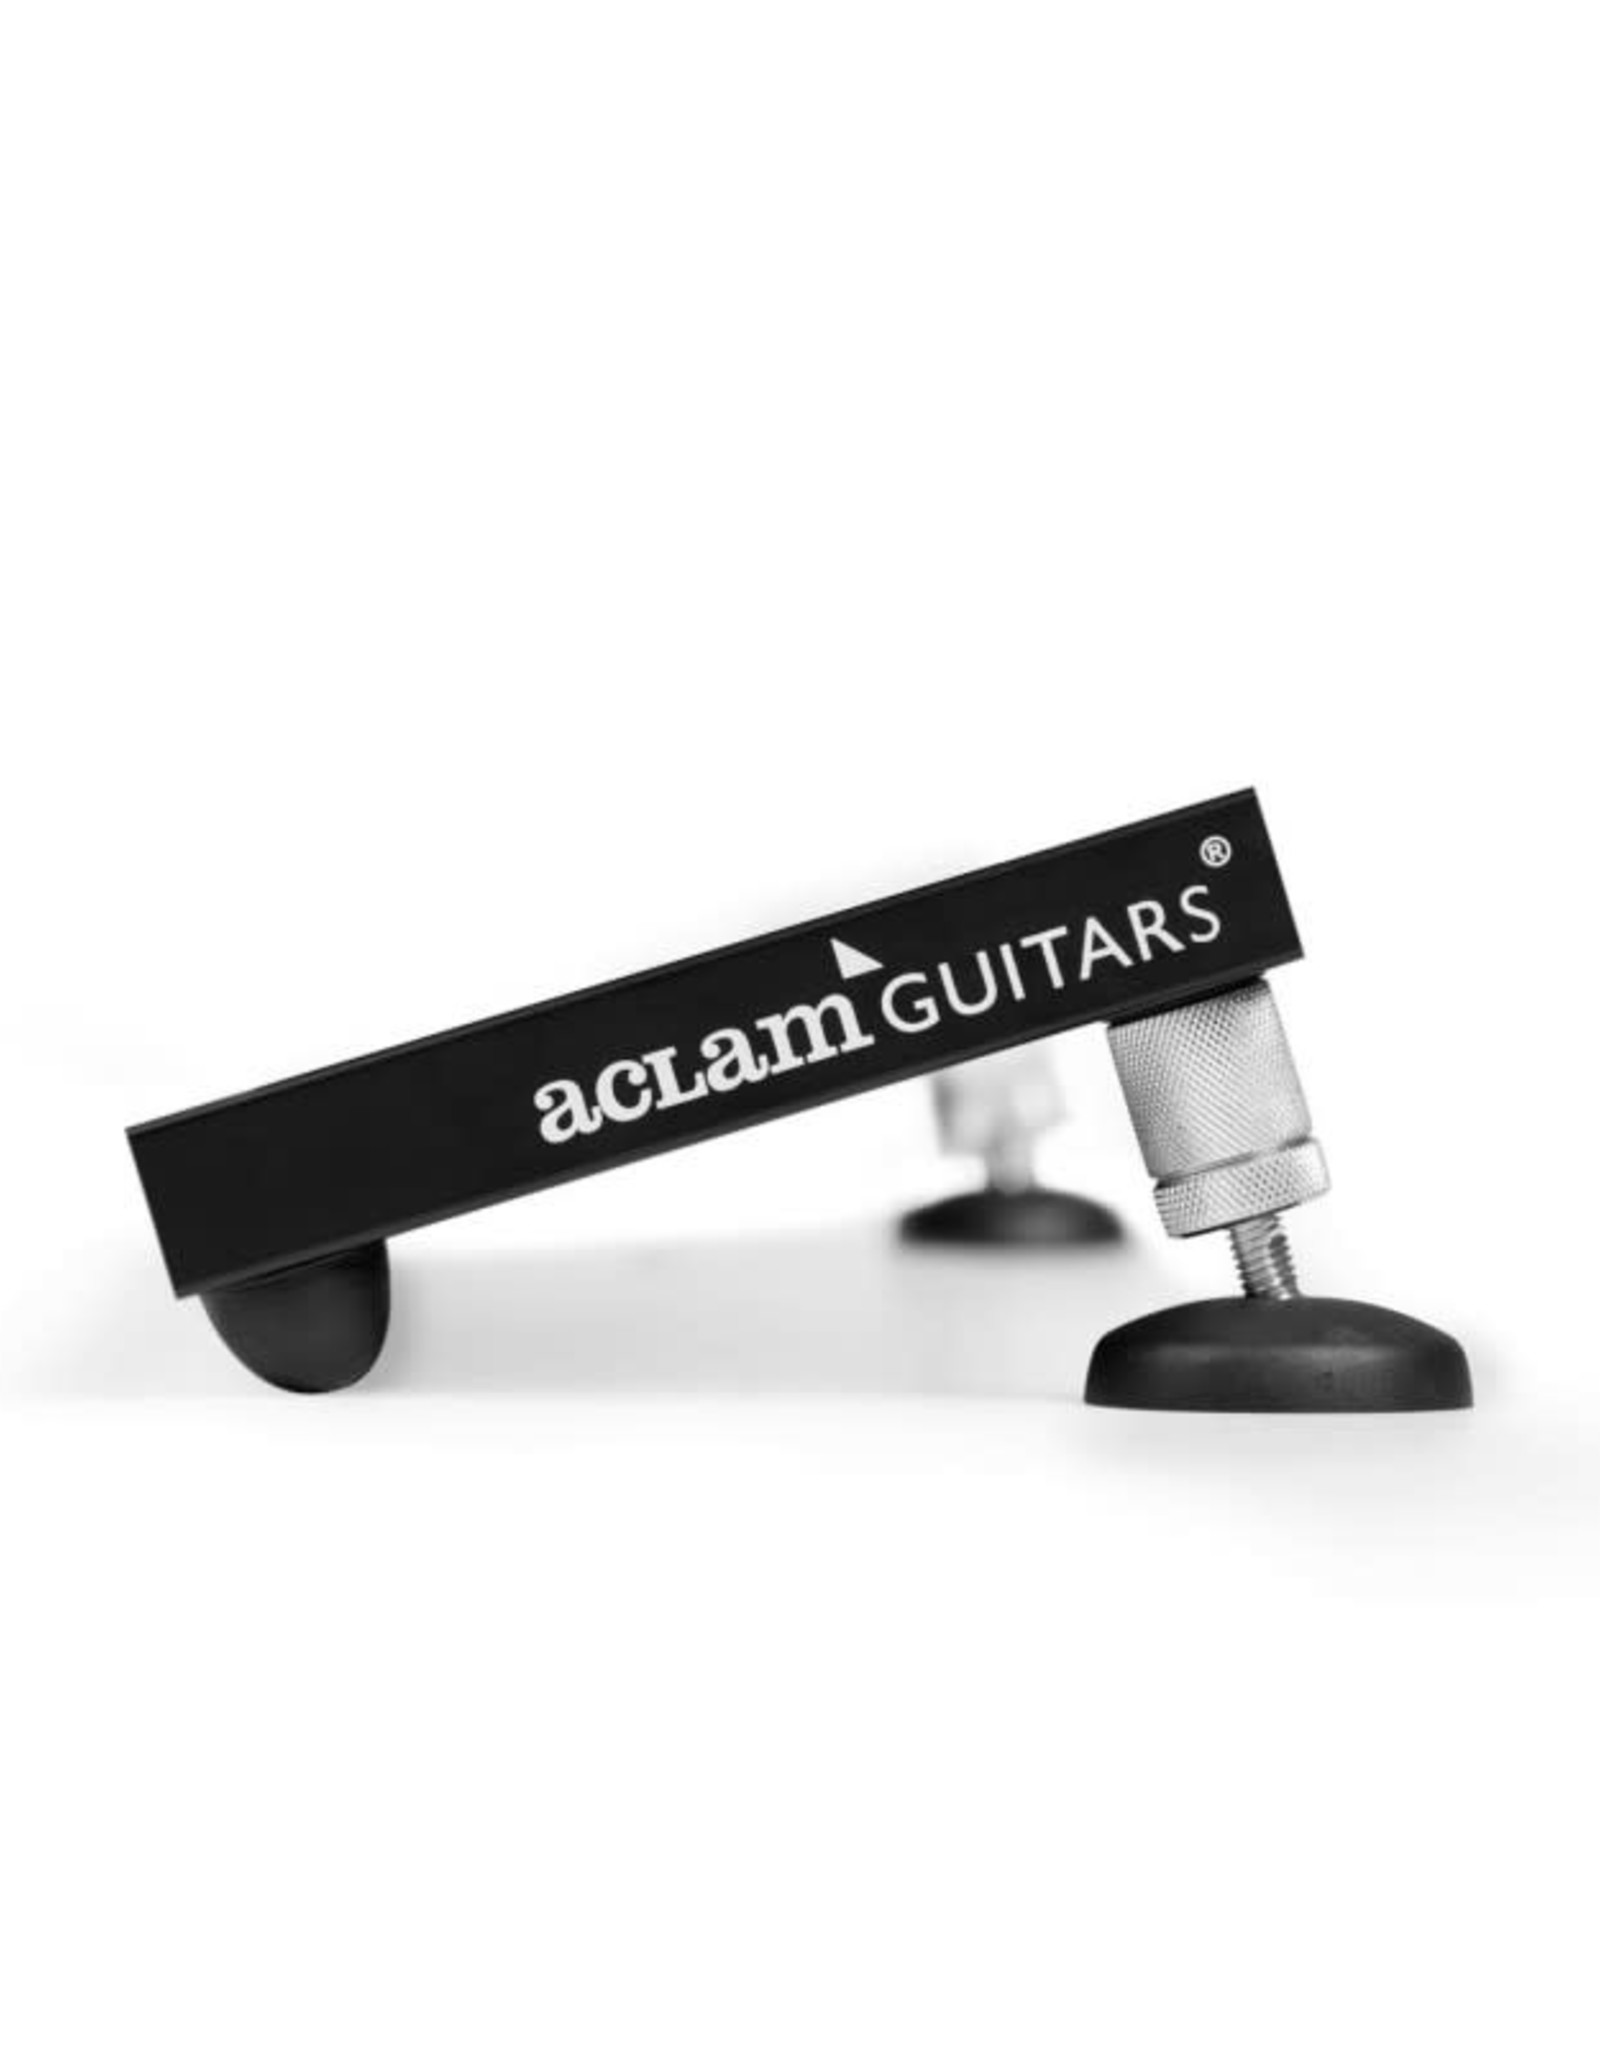 Aclam' Aclam' SMART TRACK® S1 - Top Routing Pedalboard